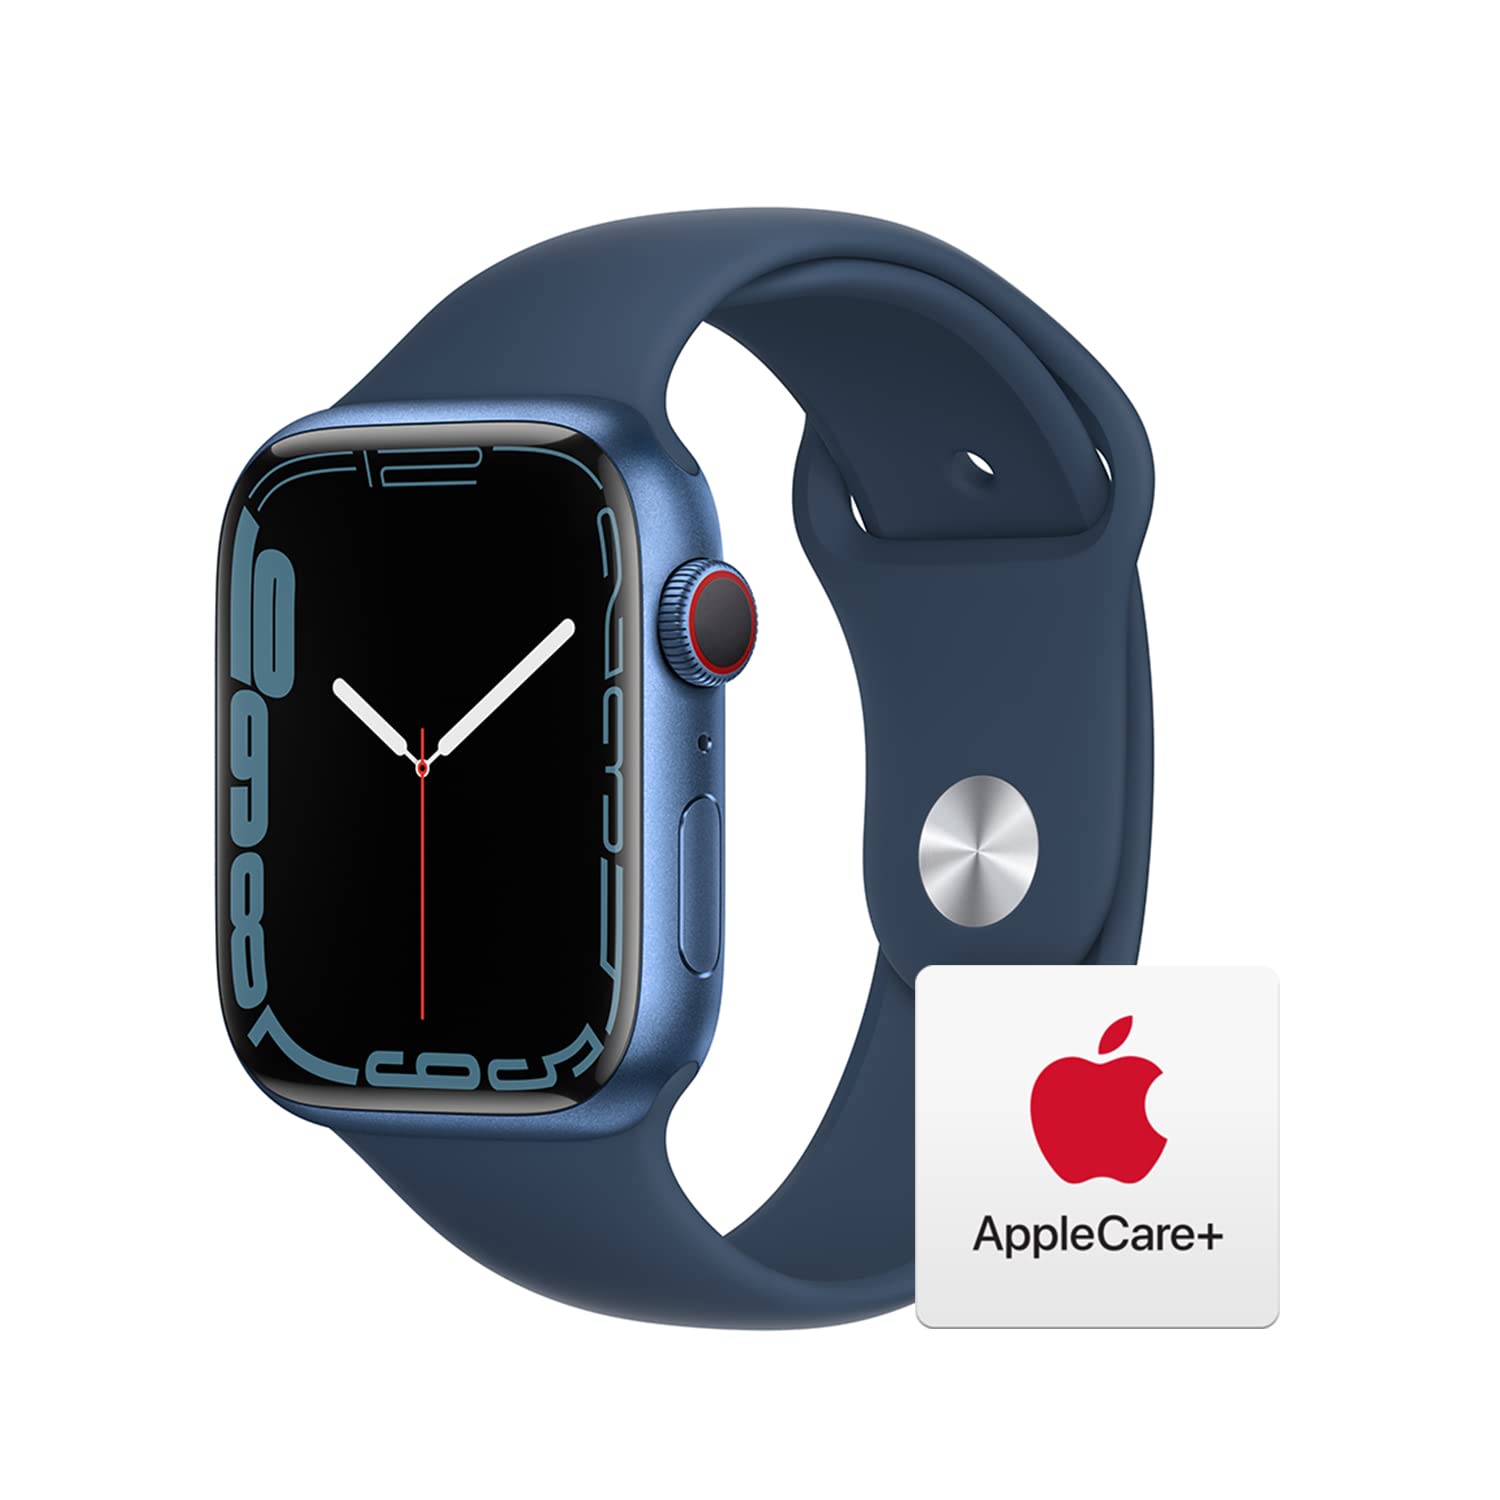 Apple Watch Series 7 [GPS + Cellular 45mm] Smart Watch w/Blue Aluminum Case with Abyss Blue Sport Band. Fitness Tracker, Blood Oxygen & ECG Apps, Always-On Retina Display, Water Resistant AppleCare